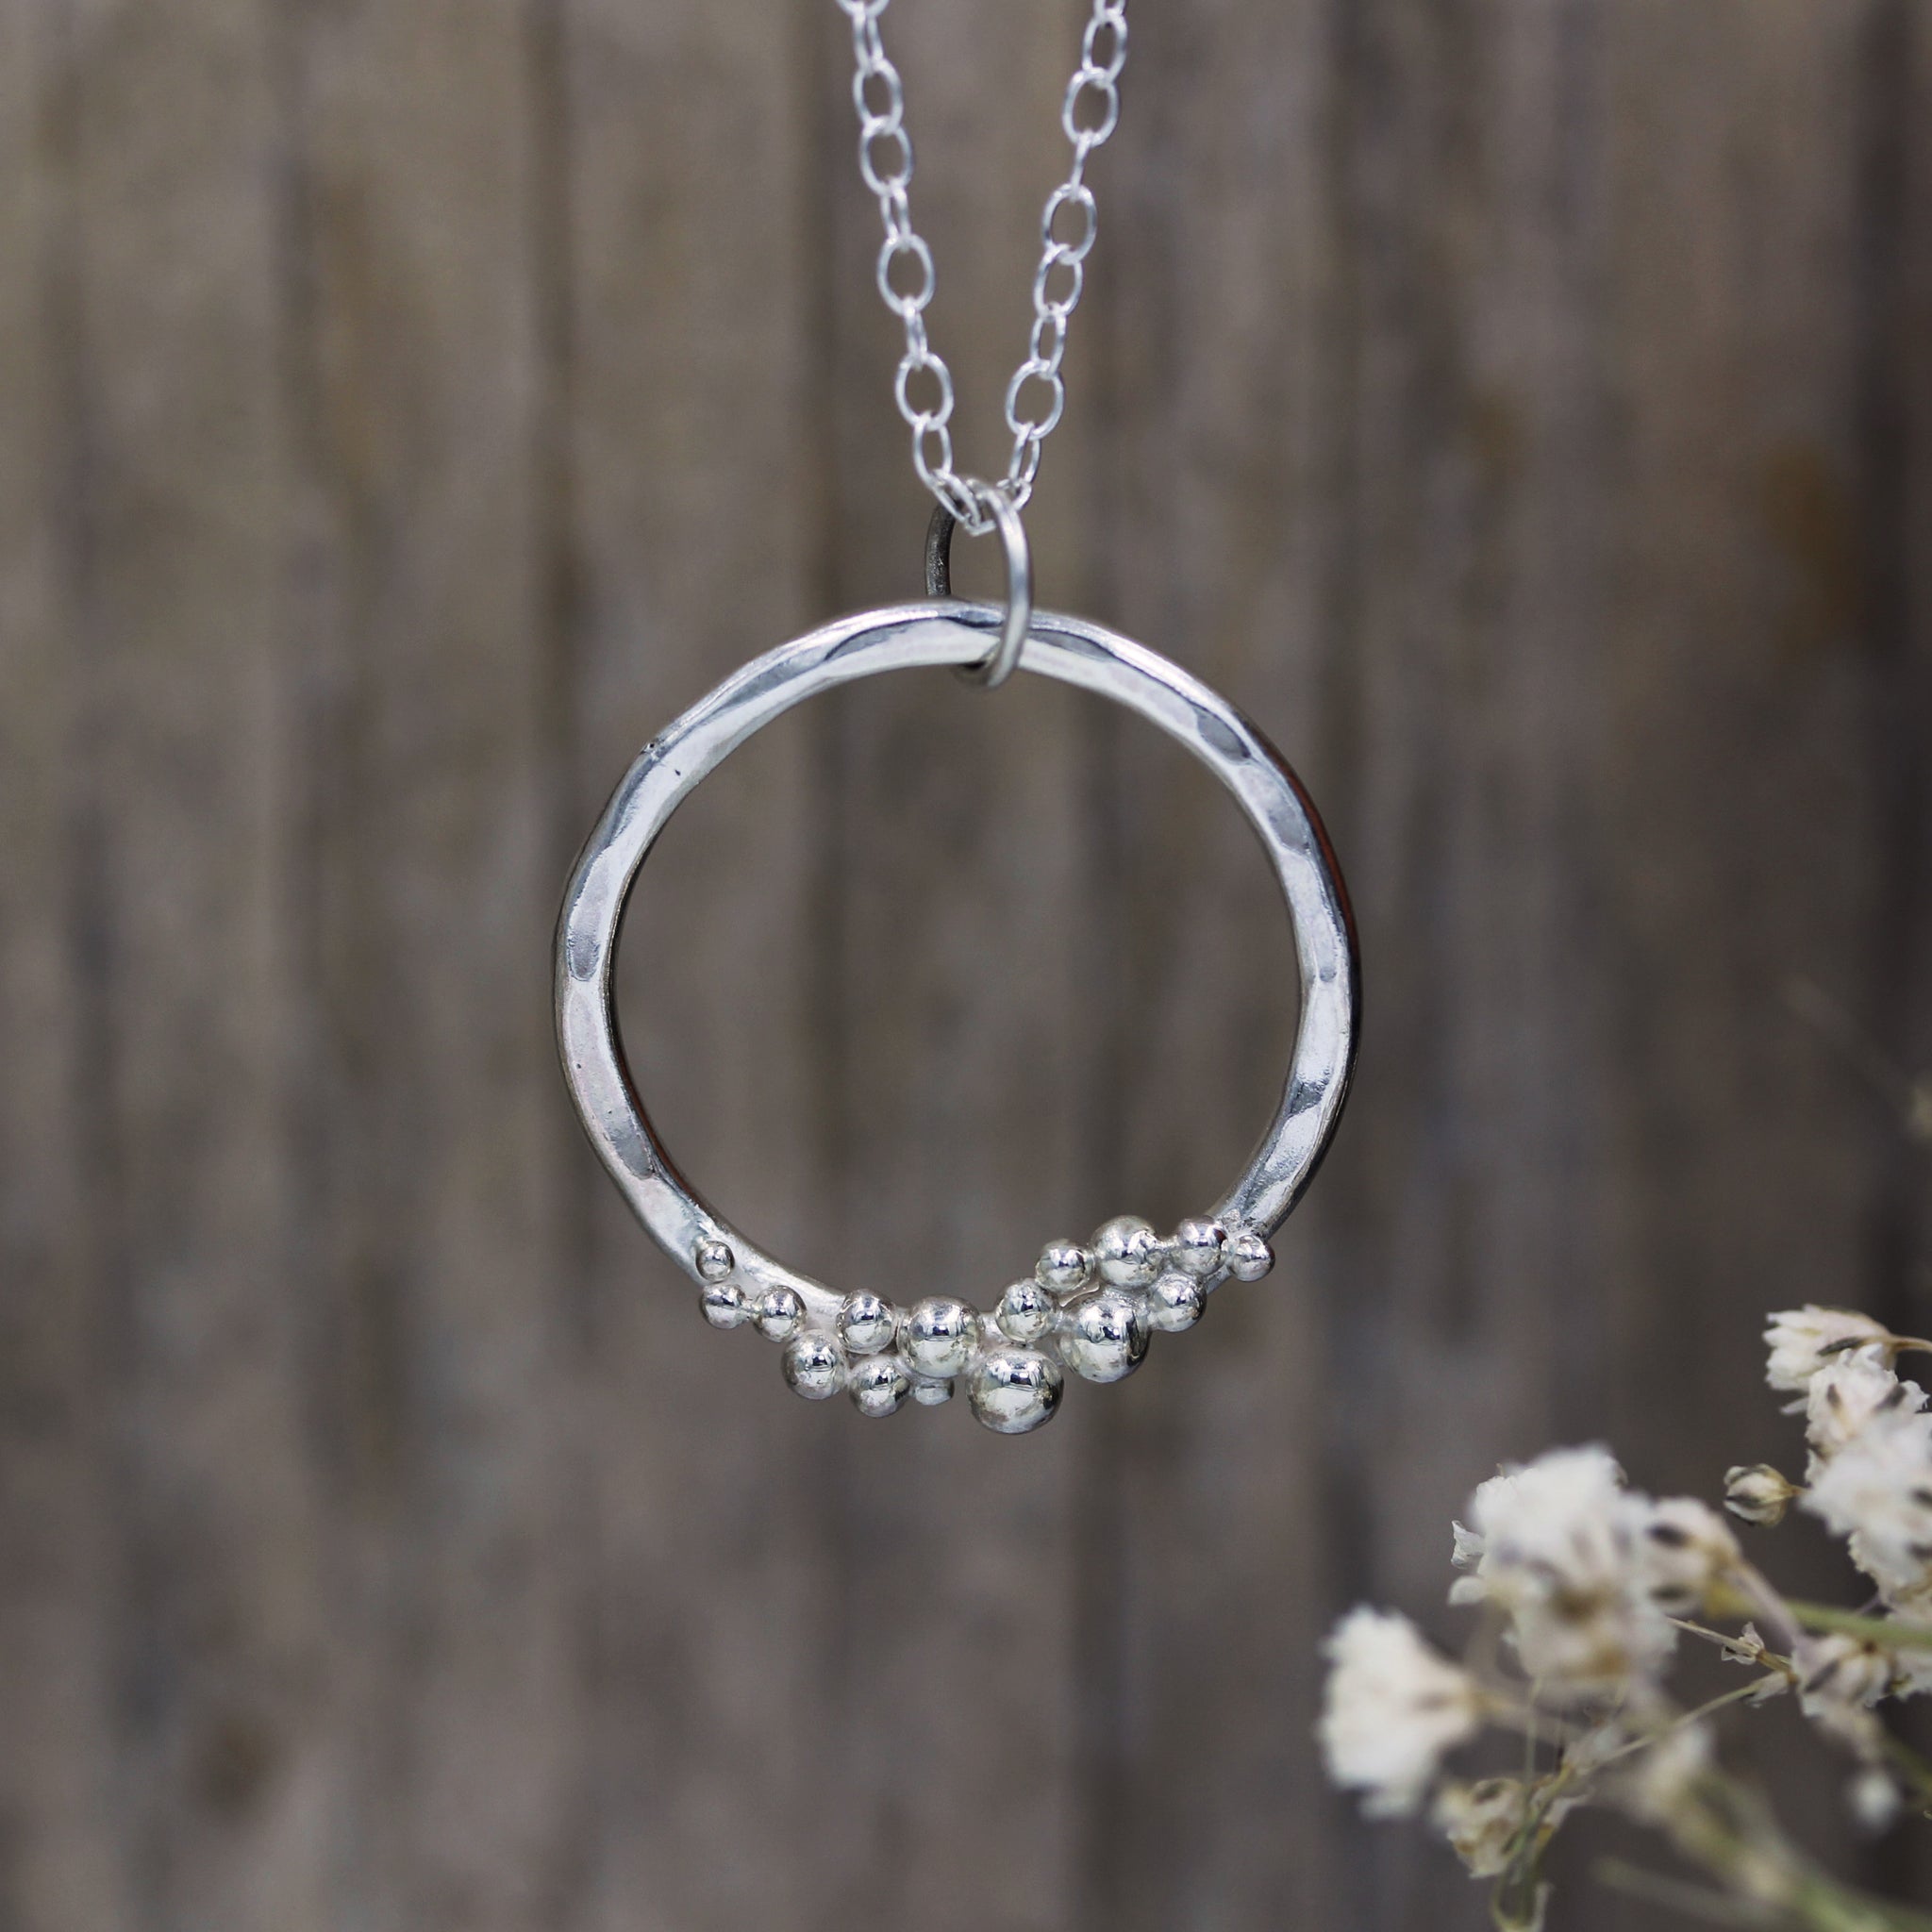 Sea inspired necklace handmade in 100% recycled sterling silver by  Gemma Tremayne Jewellery